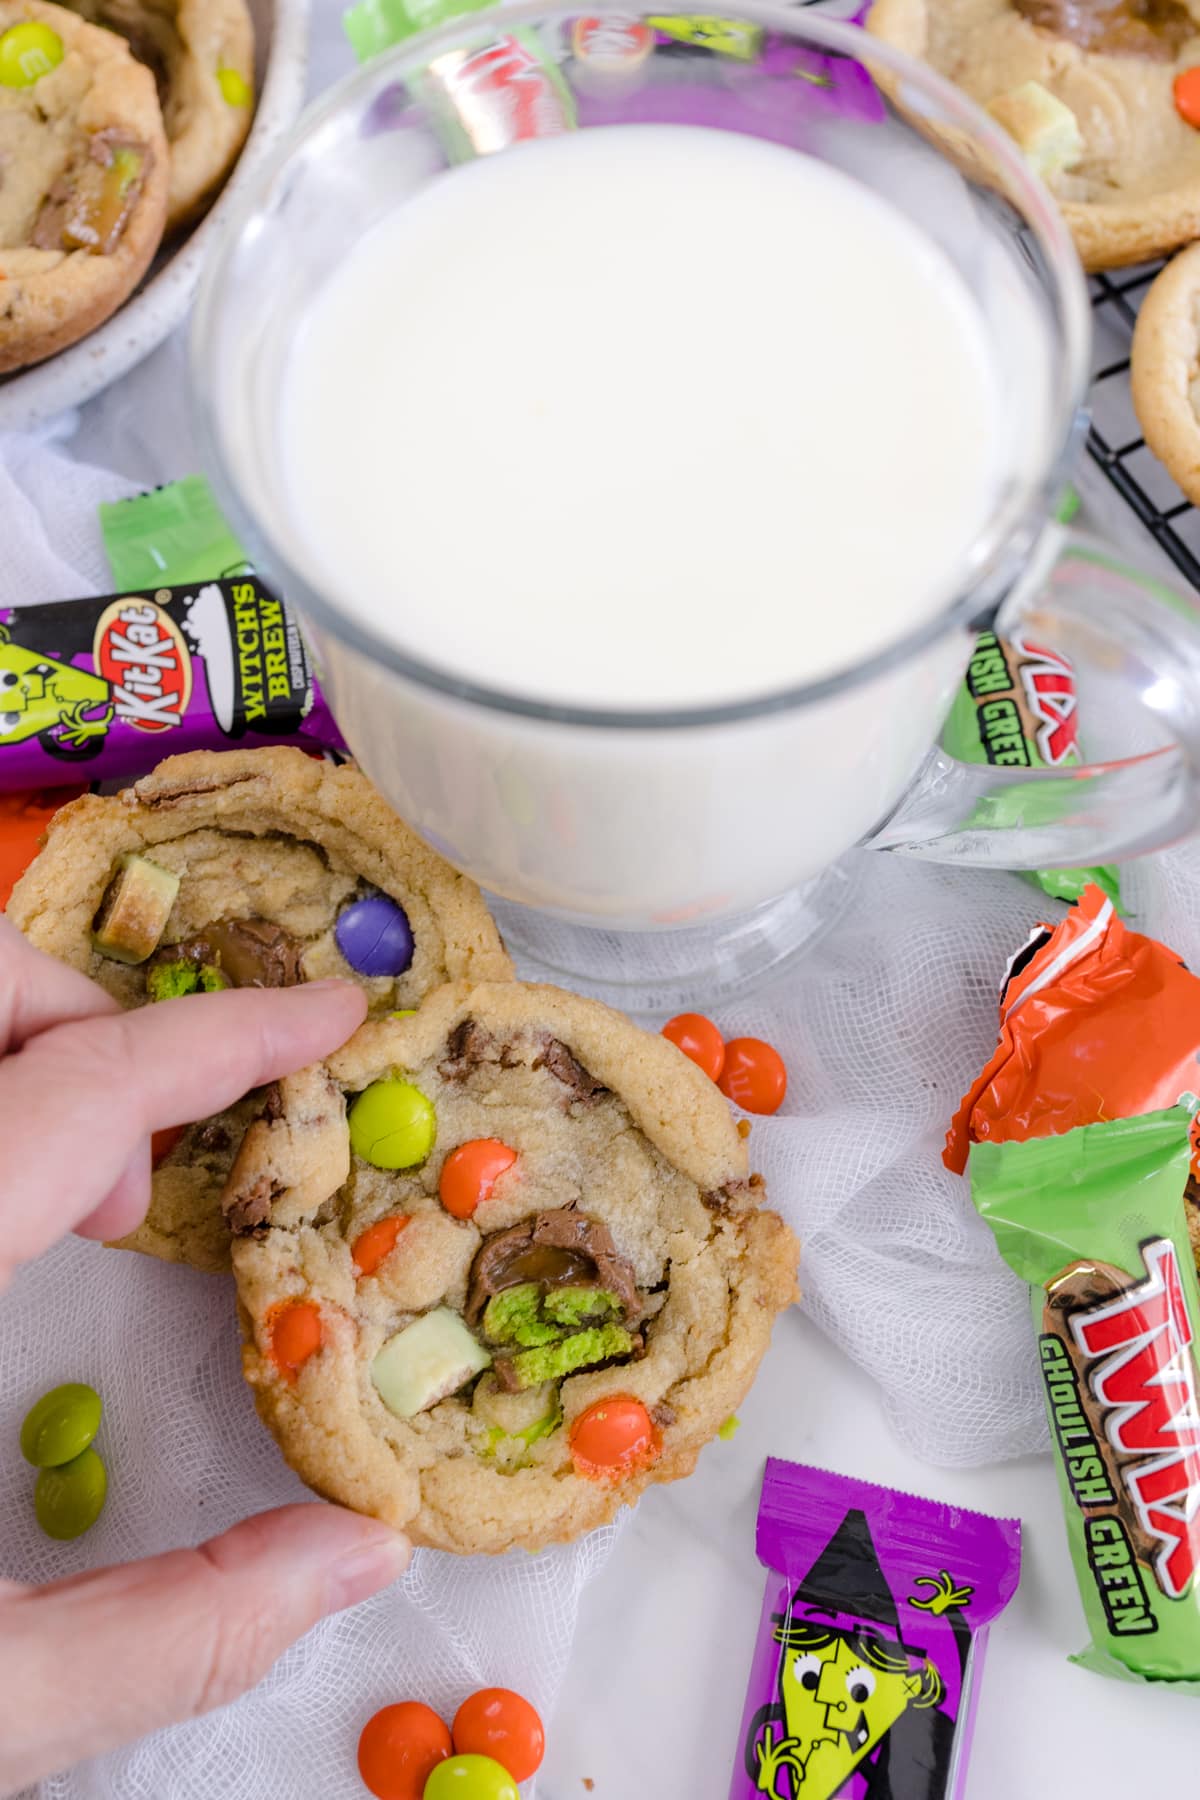 Candy bar cookie being held in front of a tall glass of milk.